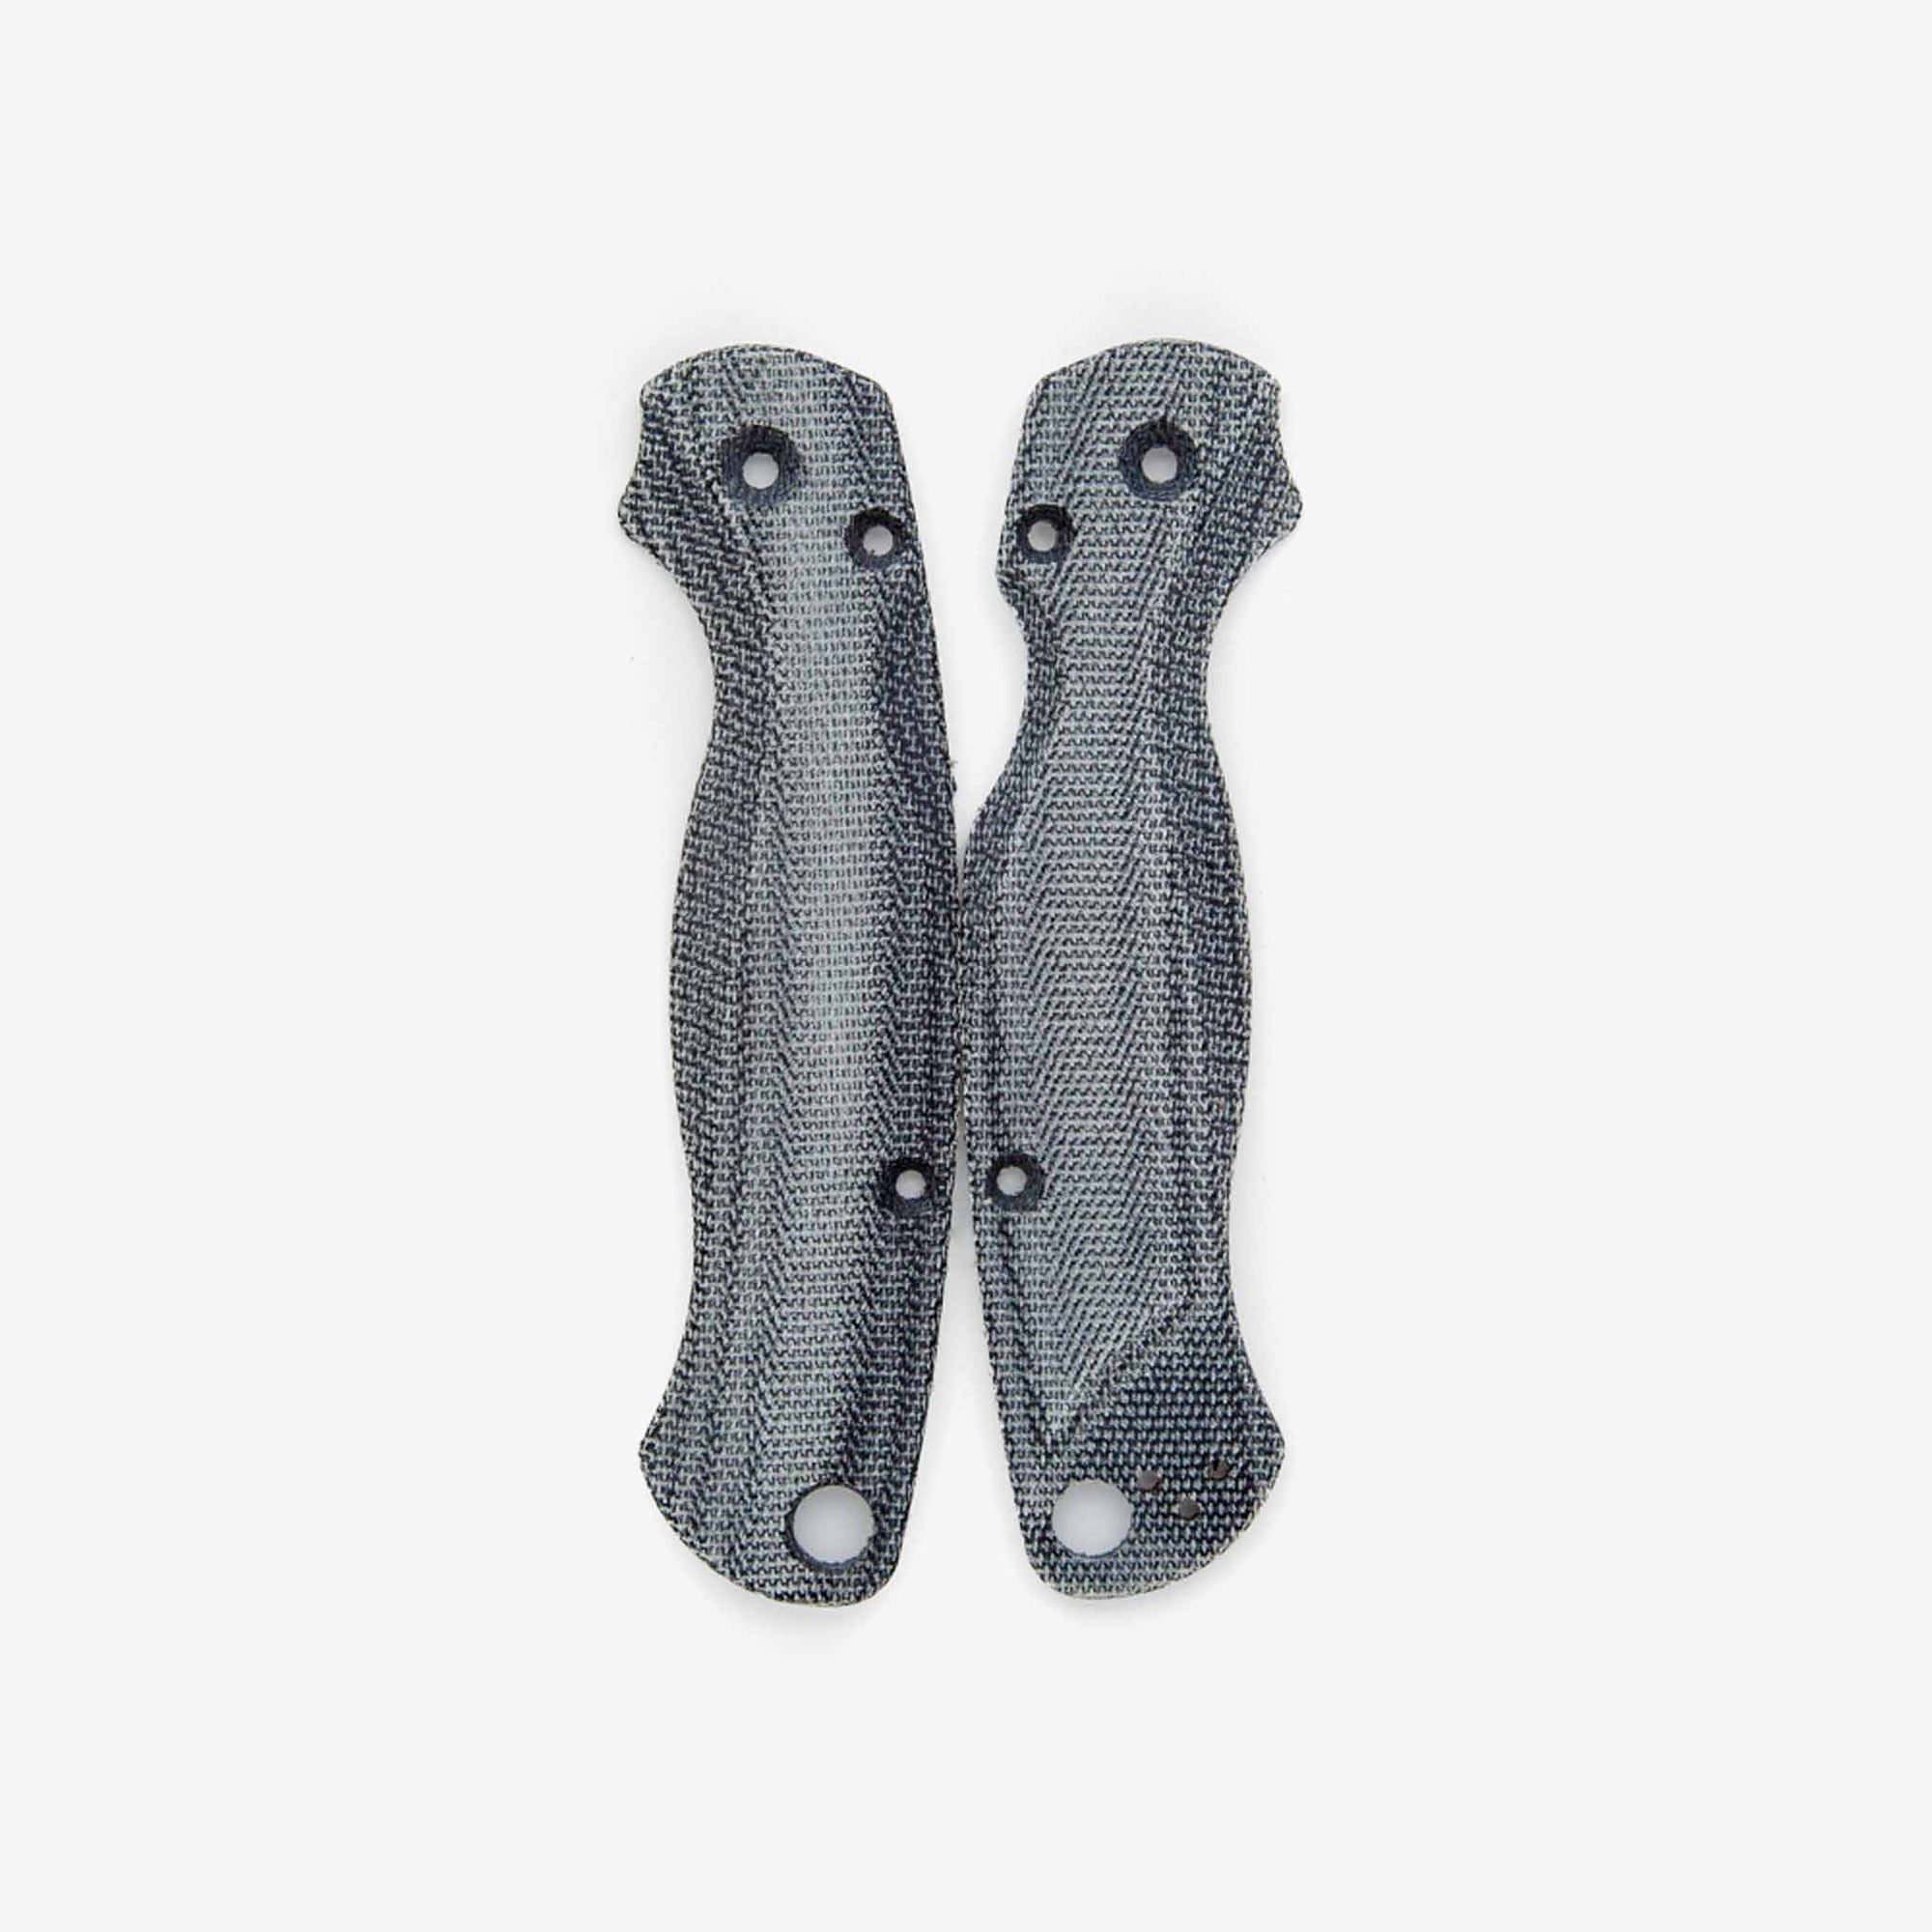 Lotus scales for the Spyderco Paramilitary 2 in black canvas micarta.